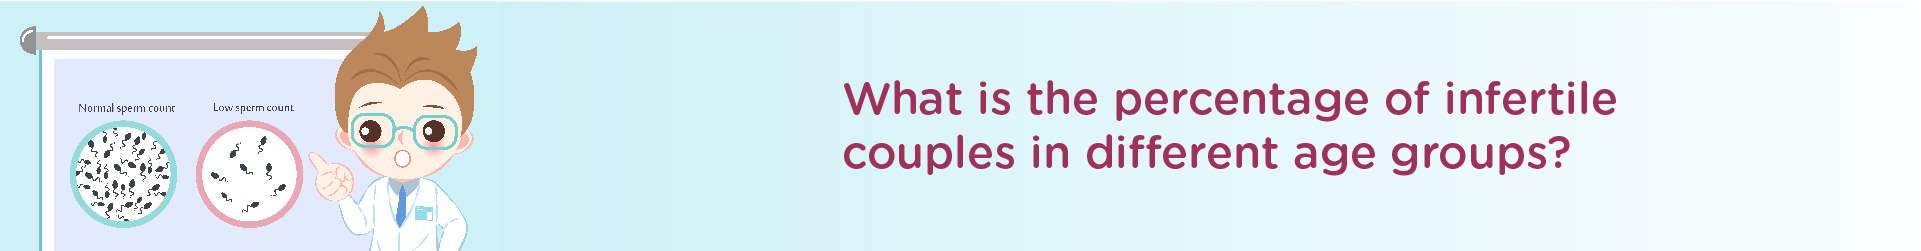 What is the percentage of infertile couples in different age groups?